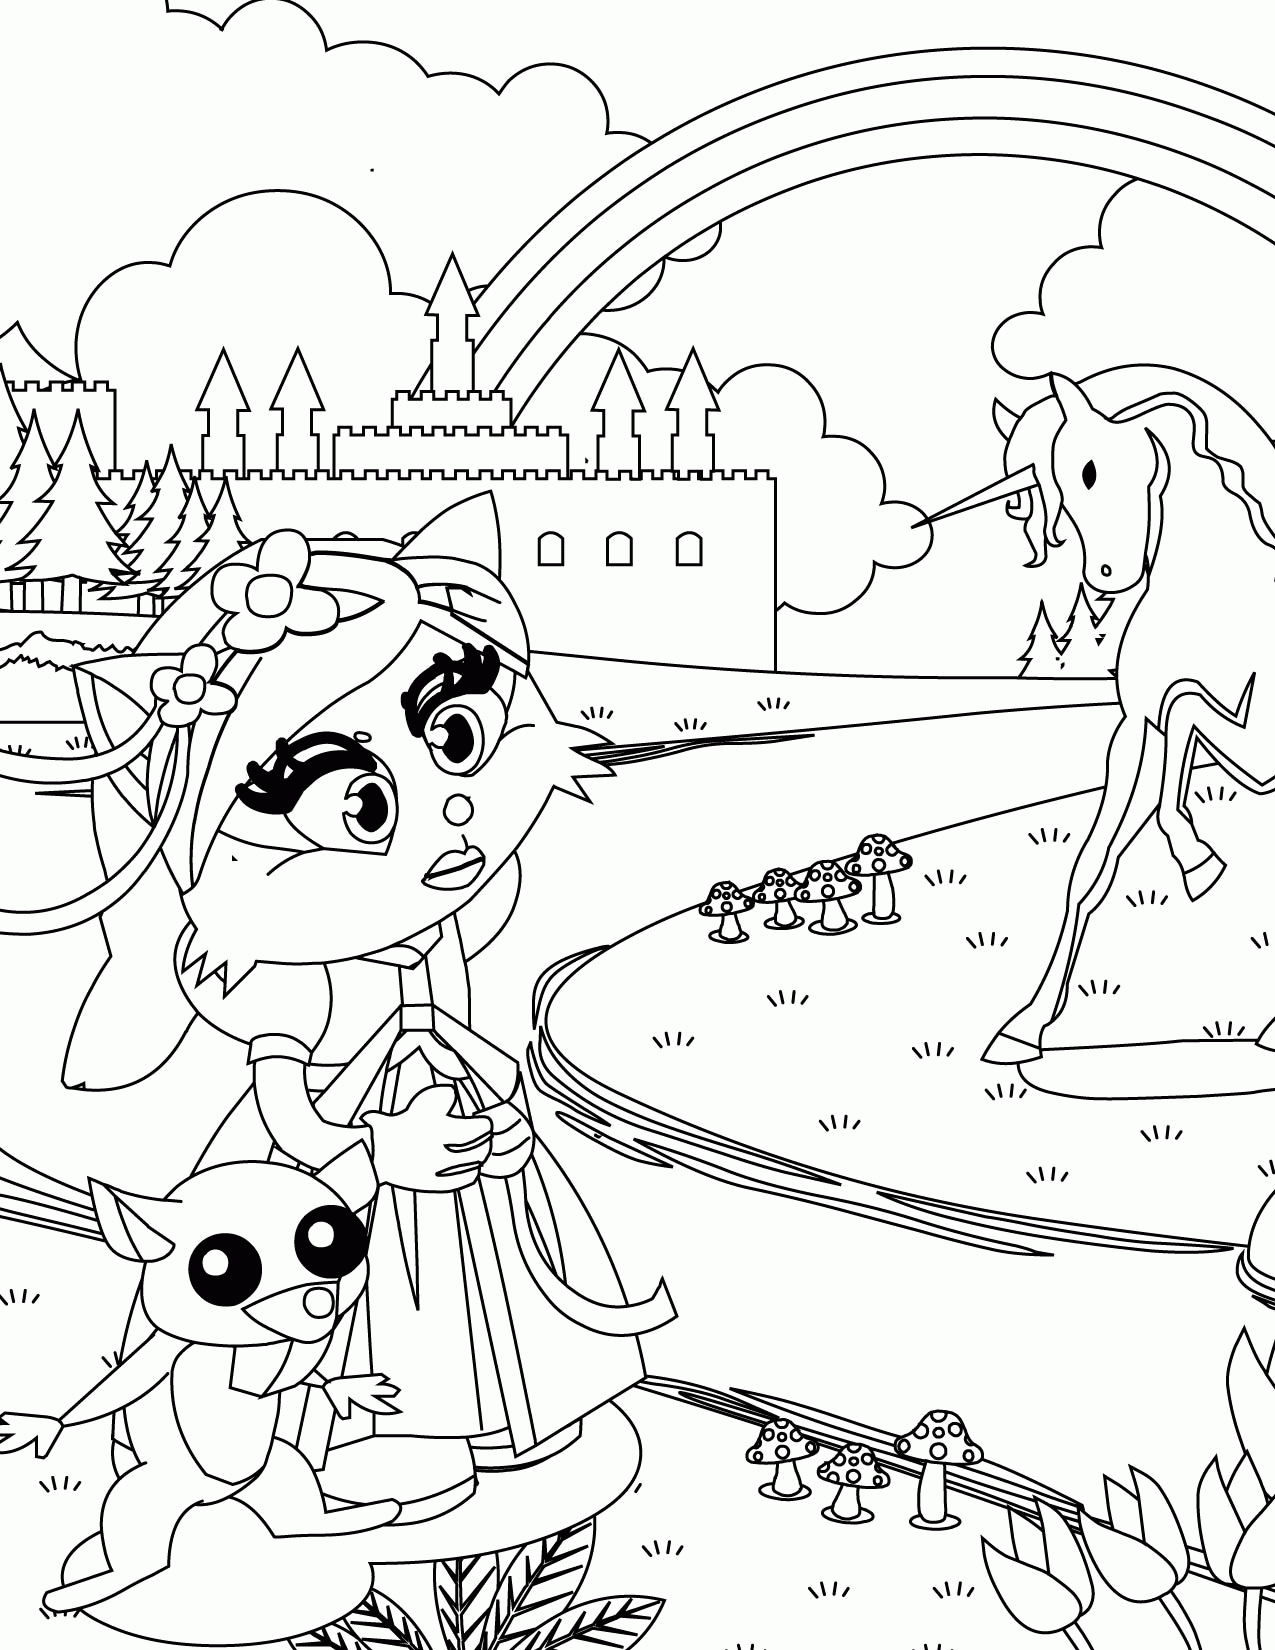 Princess Cat Coloring Page - Coloring Home